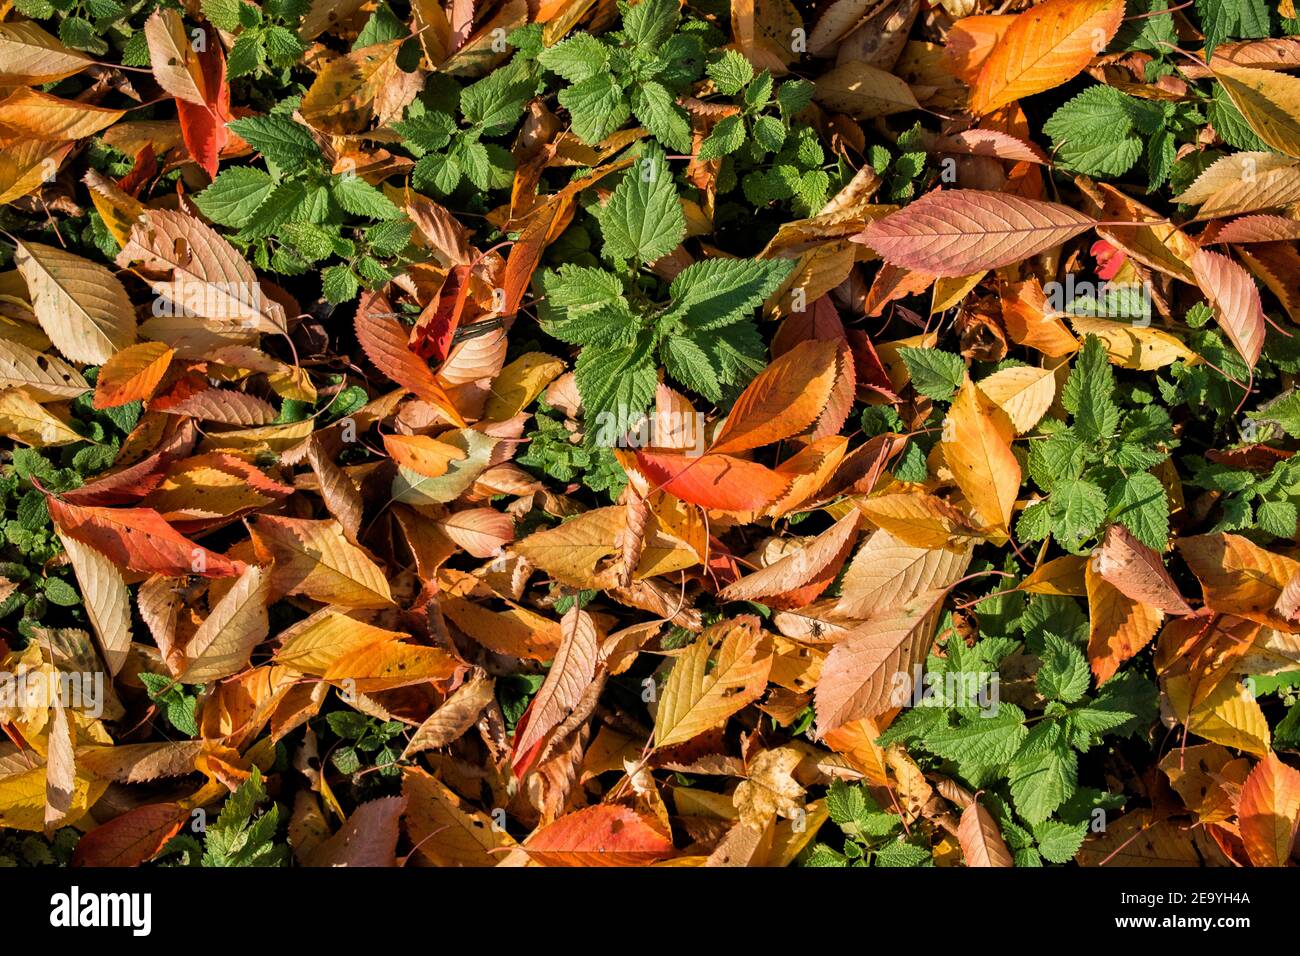 Natural texture of fallen cherry leaves and young shoots of nettle Stock Photo